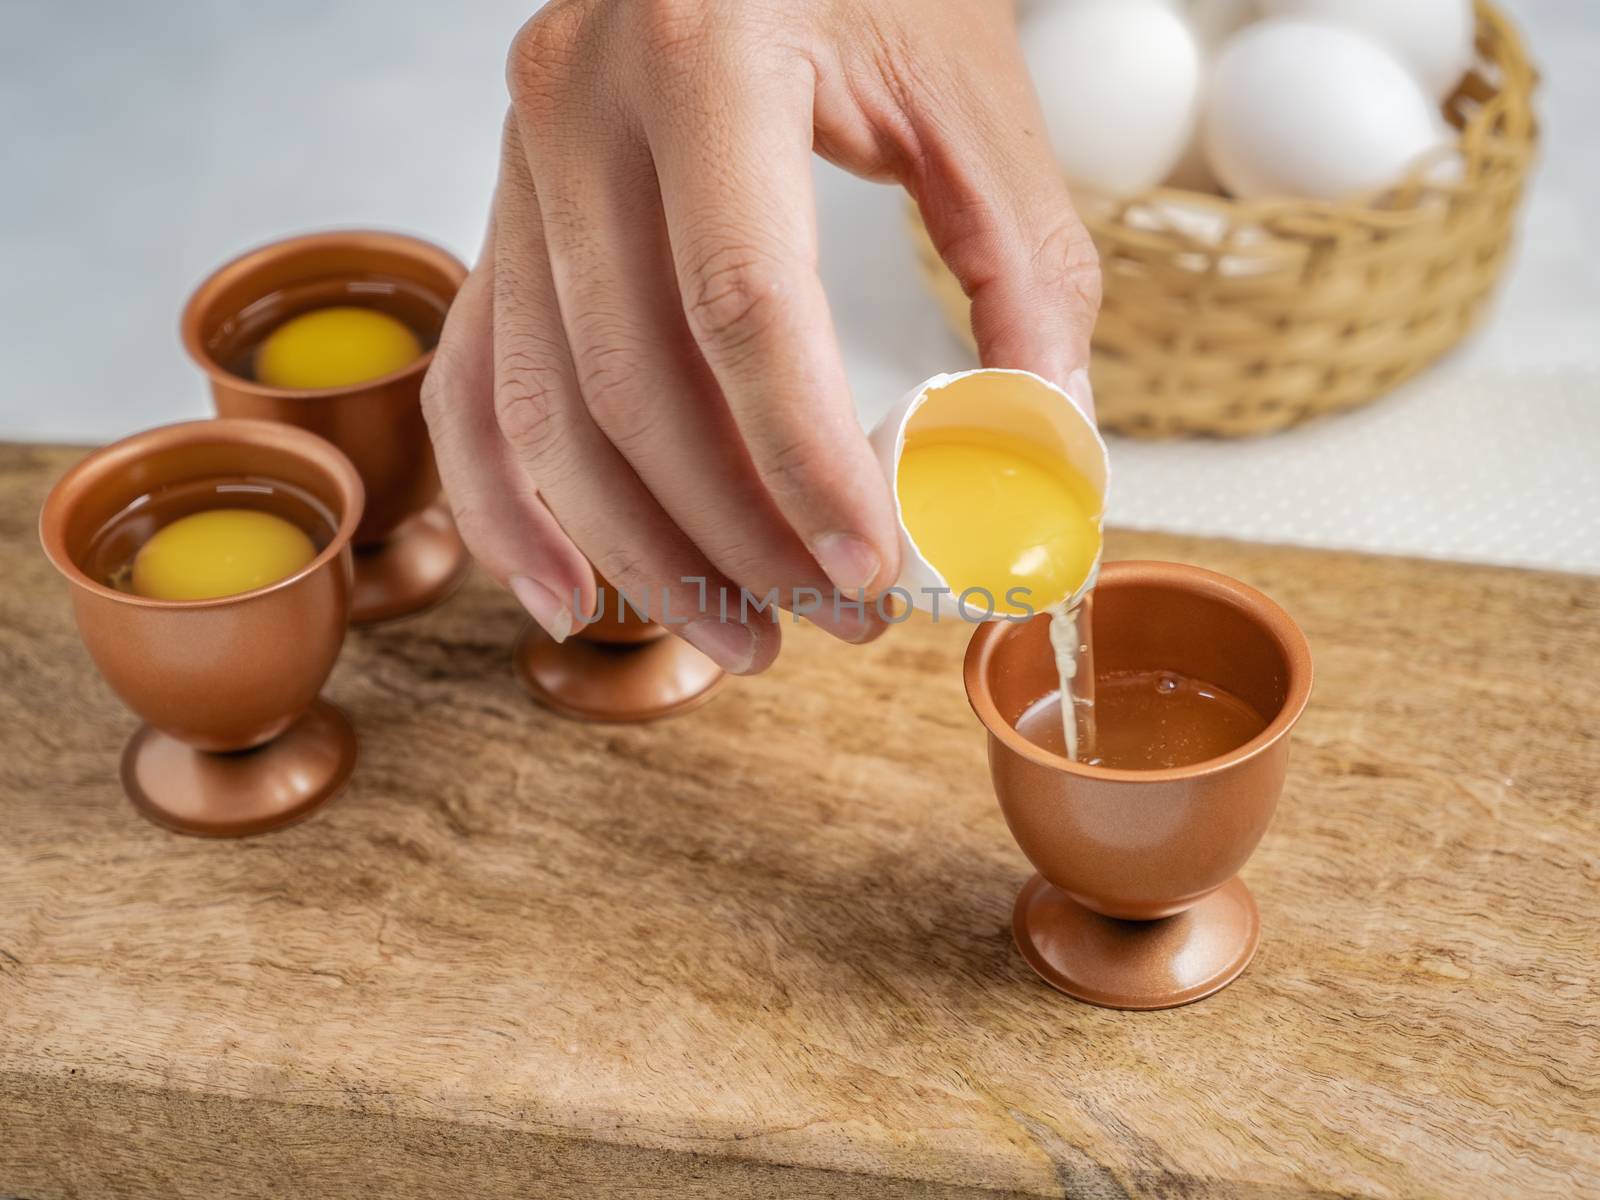 A hand pouring an egg into a copper egg cup.